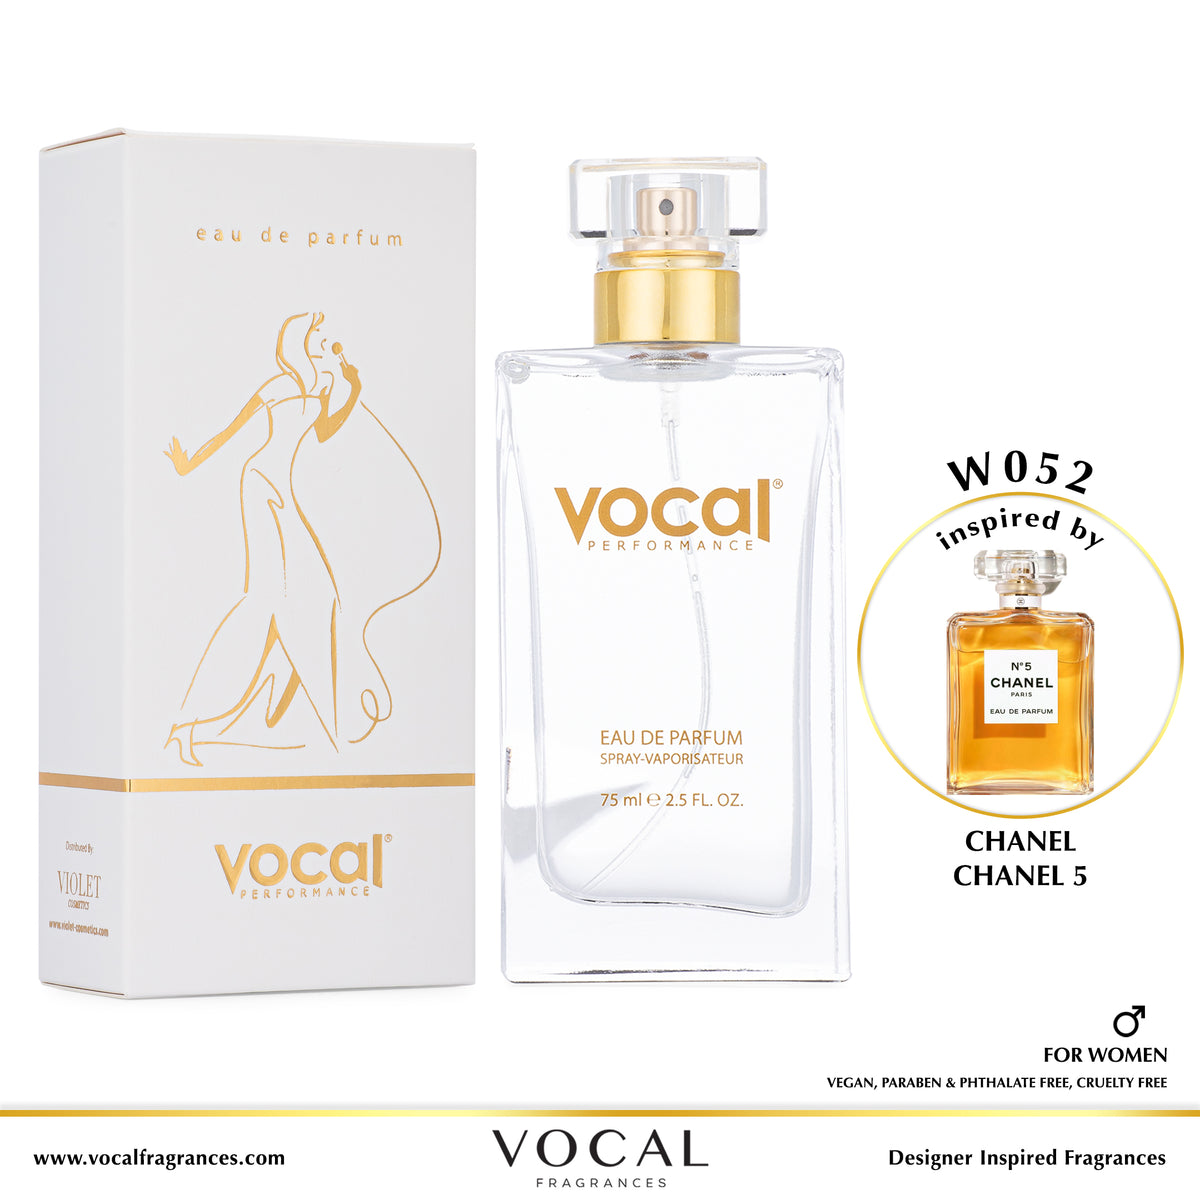 W052 Vocal Performance Eau De Parfum For Women Inspired by Chanel Chan